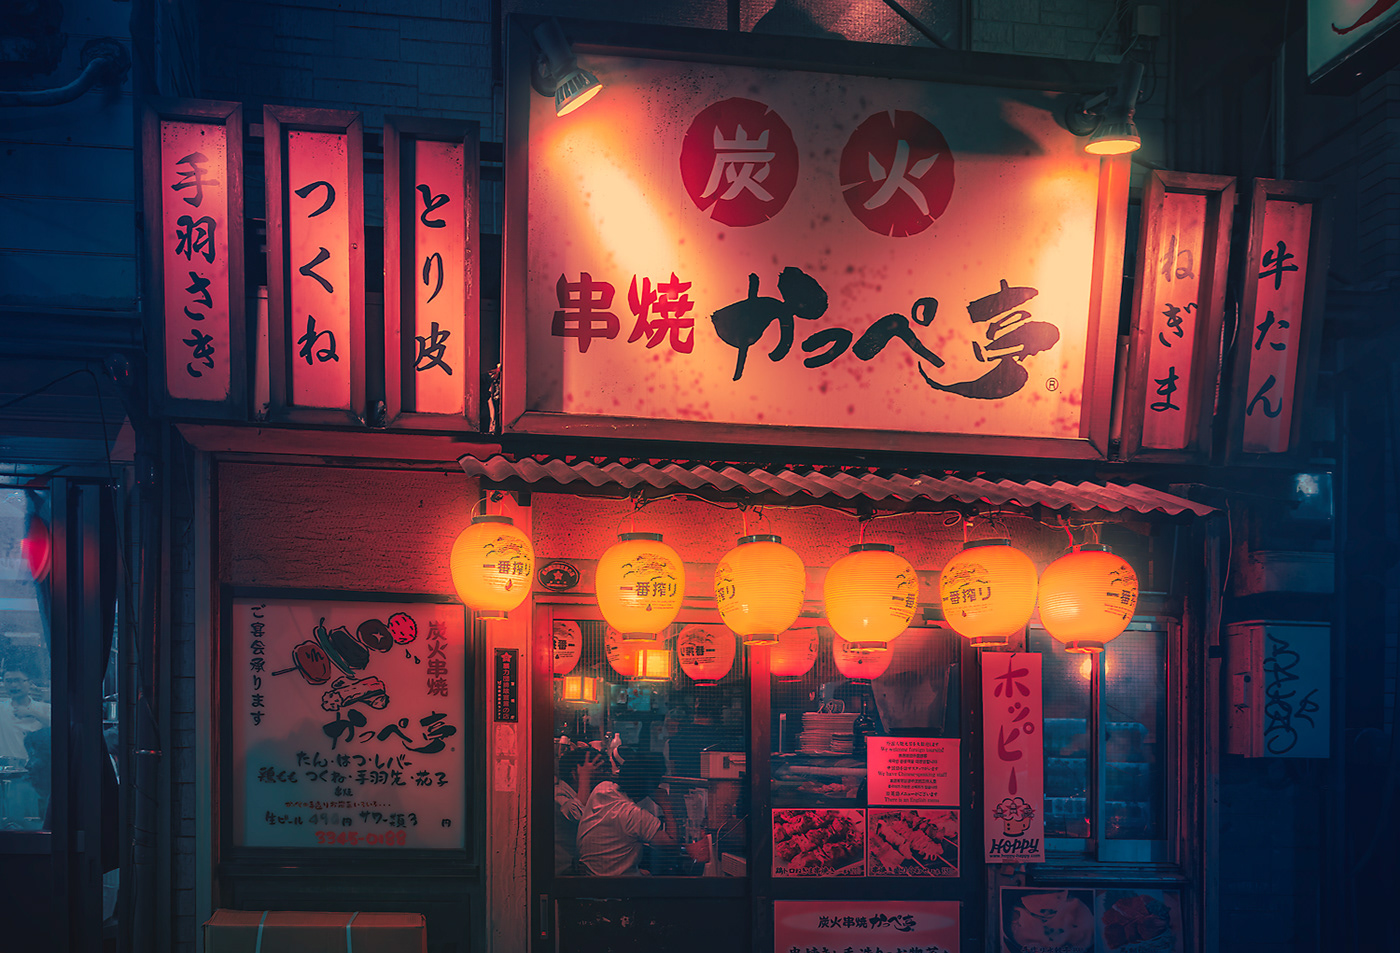 Anthony presley color culture japan night Photography  Street tokyo Travel Urban